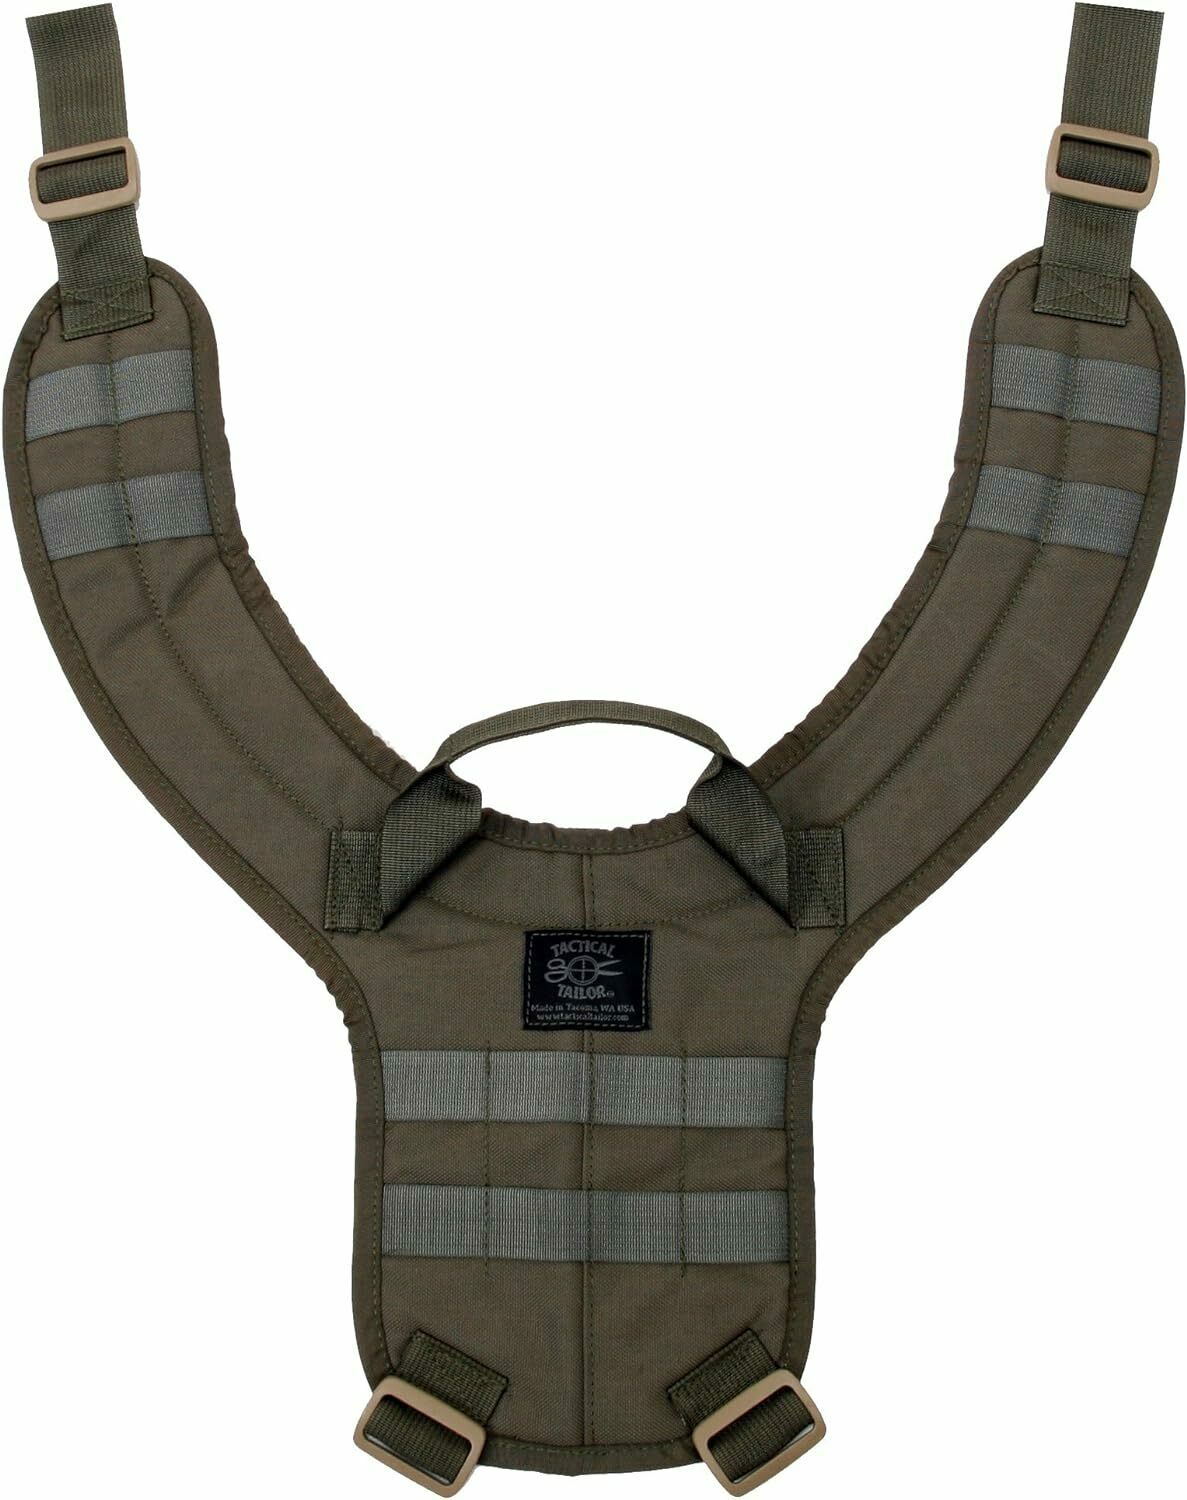 Tactical Tailor X Harness（23023），官方产品图